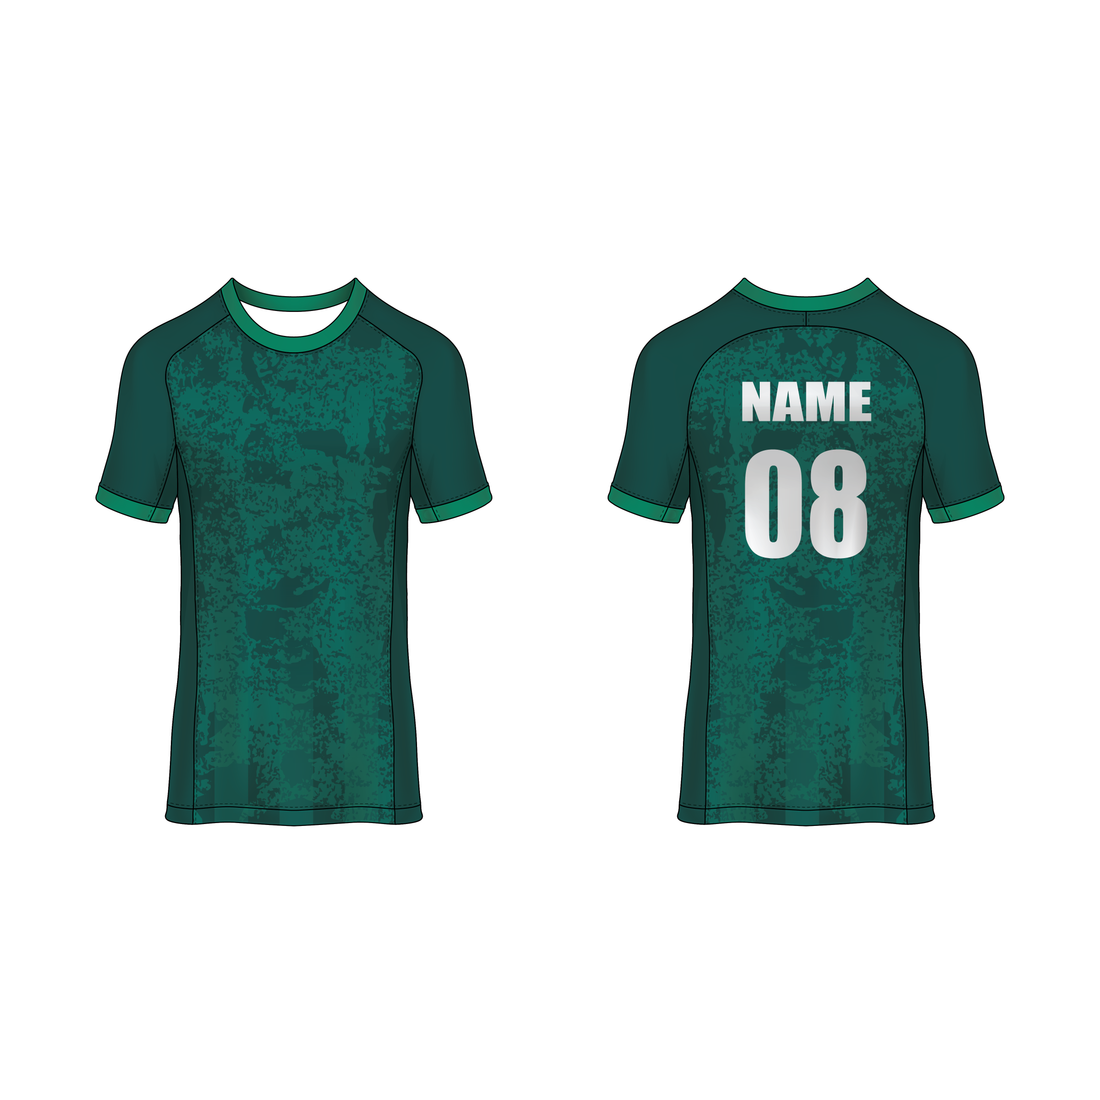 NEXT PRINT All Over Printed Customized Sublimation T-Shirt Unisex Sports Jersey Player Name & Number, Team Name NP50000253